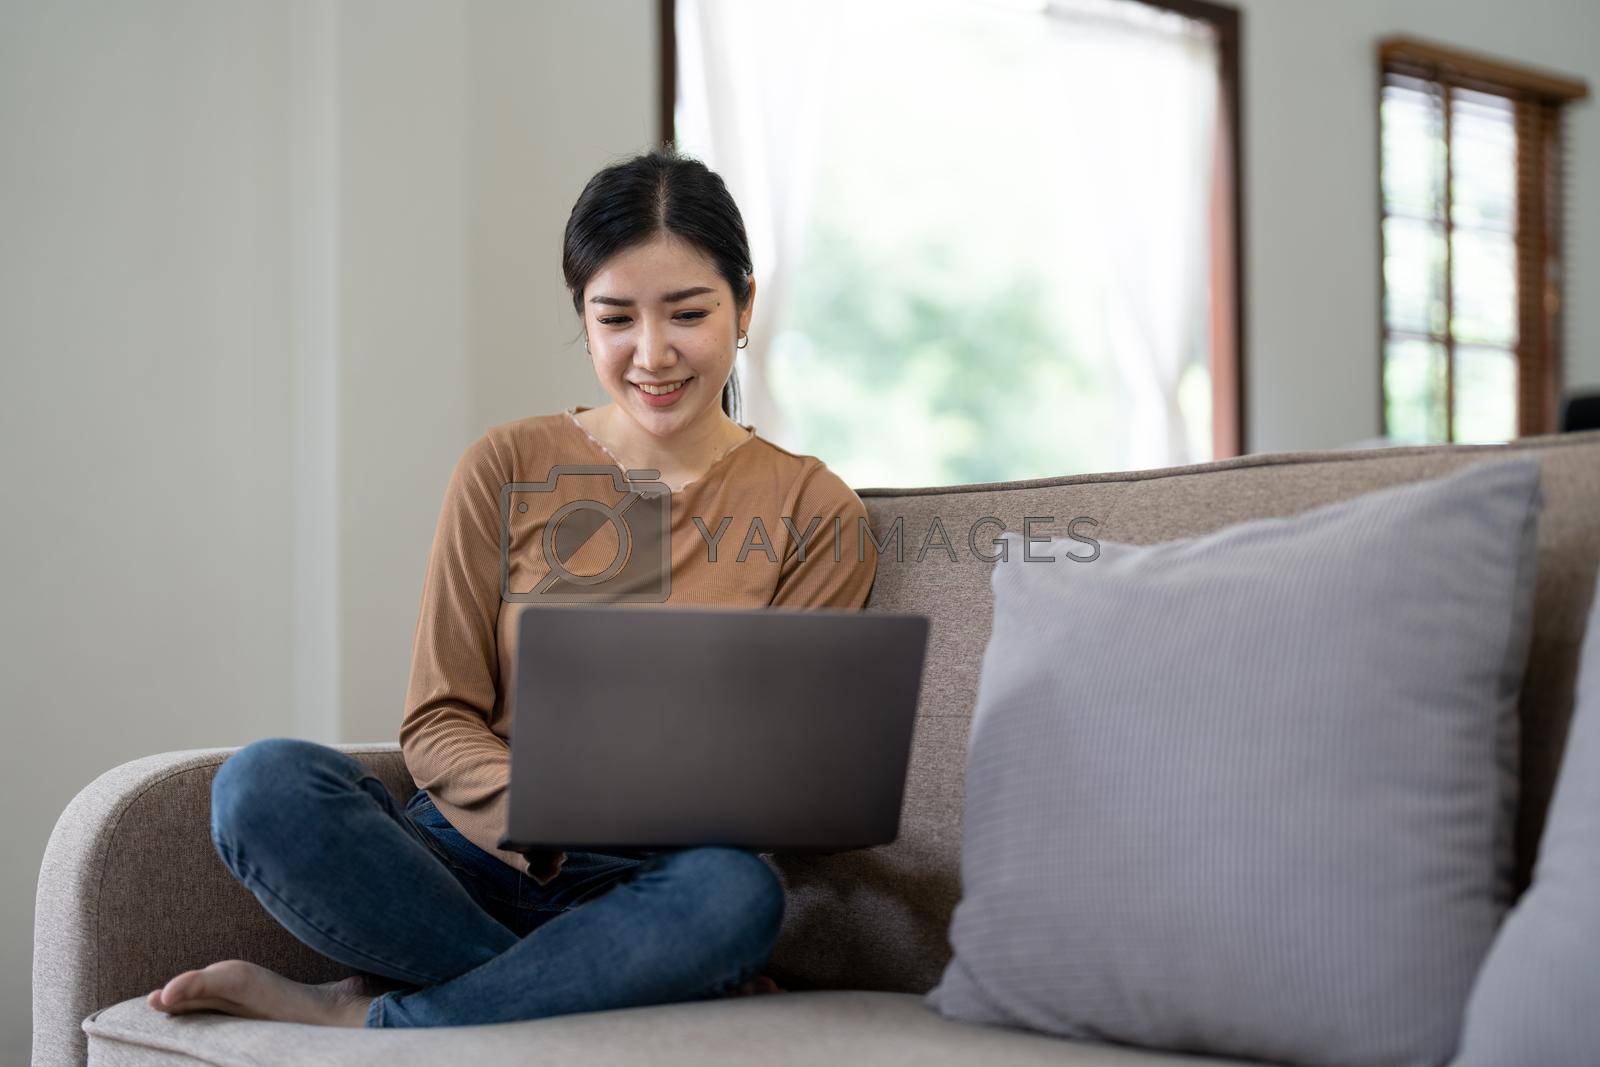 Royalty free image of Happy asian woman using laptop in the sofa with a happy face standing and smiling with a confident smile showing teeth by nateemee